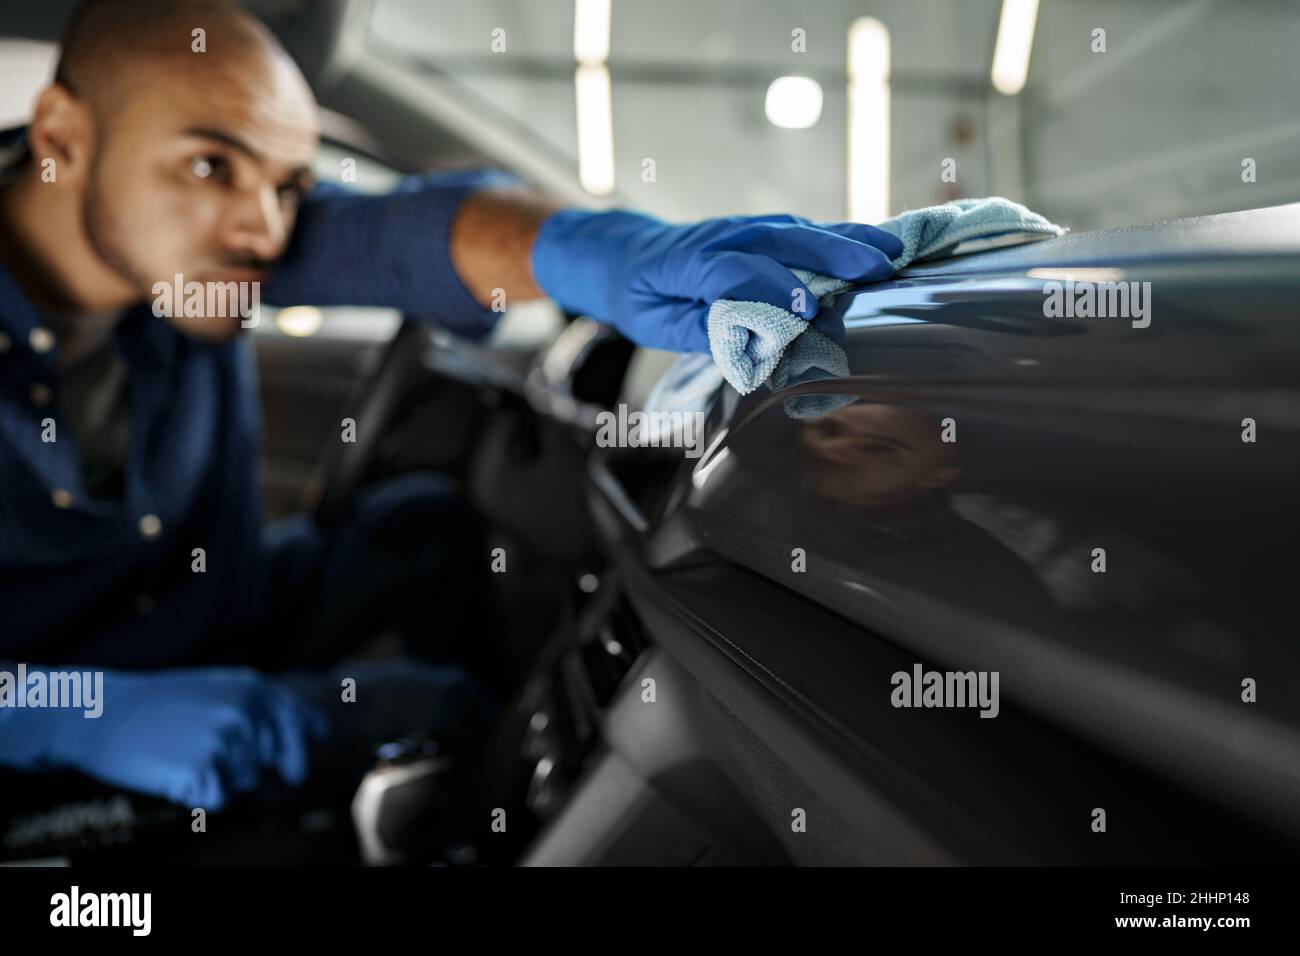 A man cleaning car interior, car detailing in Carwash service Stock Photo